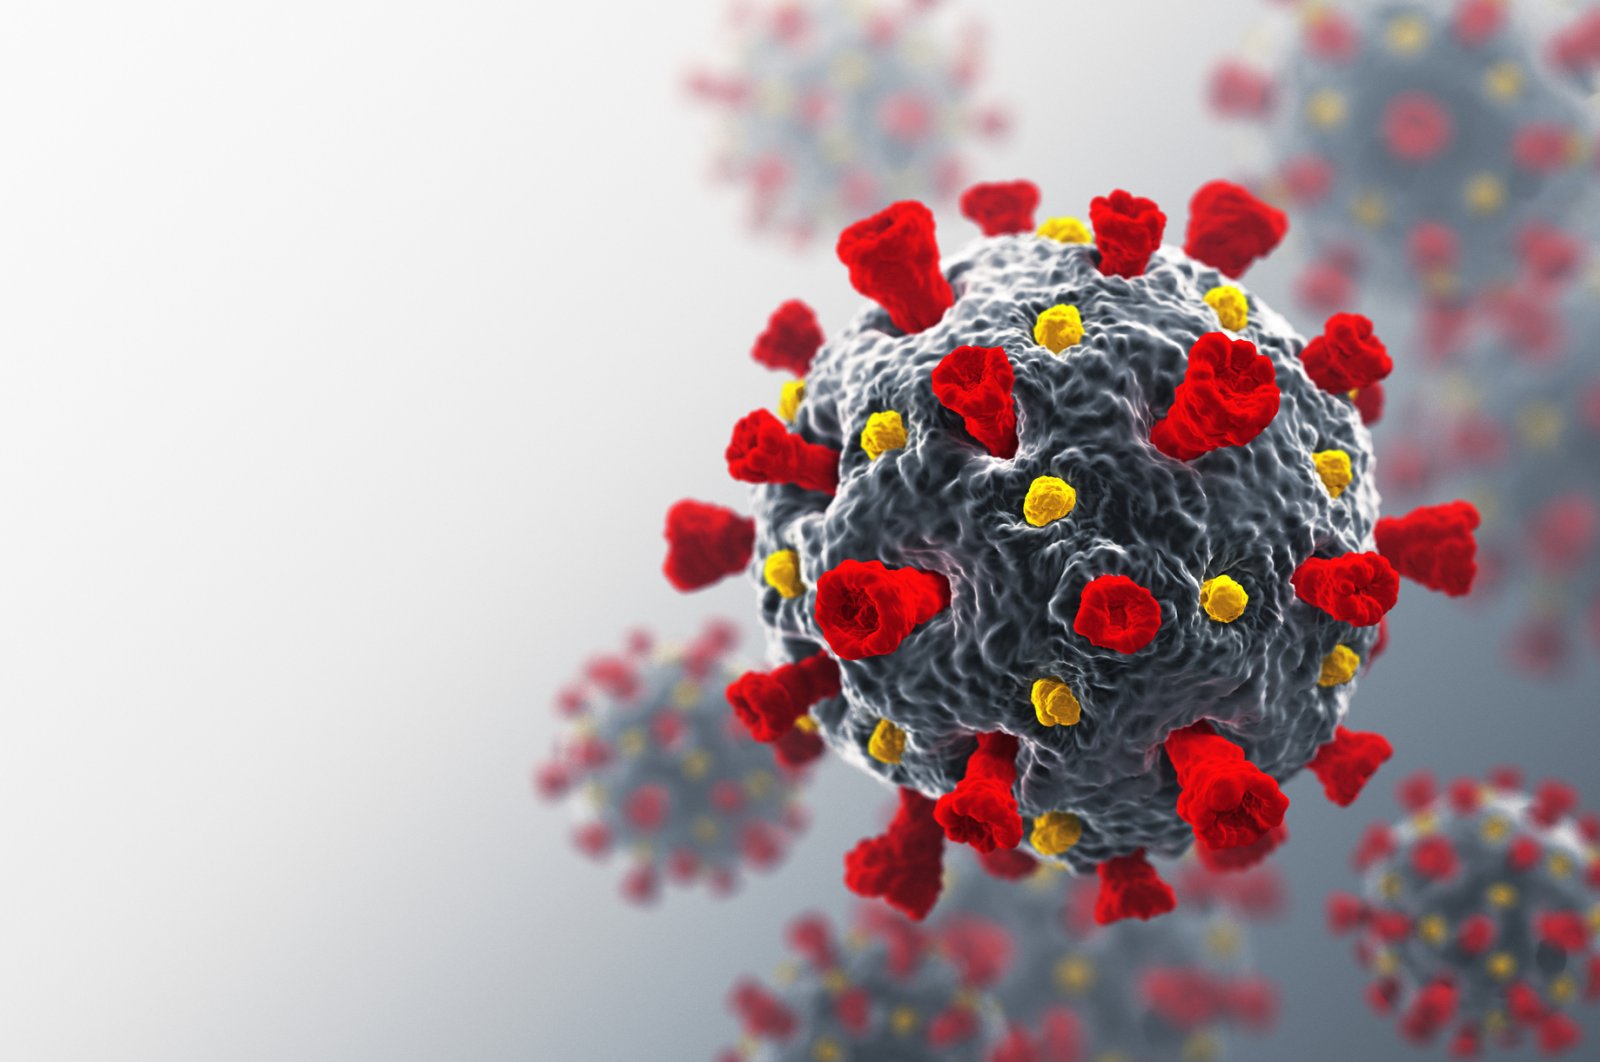 The illustration shows a 3D-printed model of the novel coronavirus which causes COVID-19. (iStock Photo)